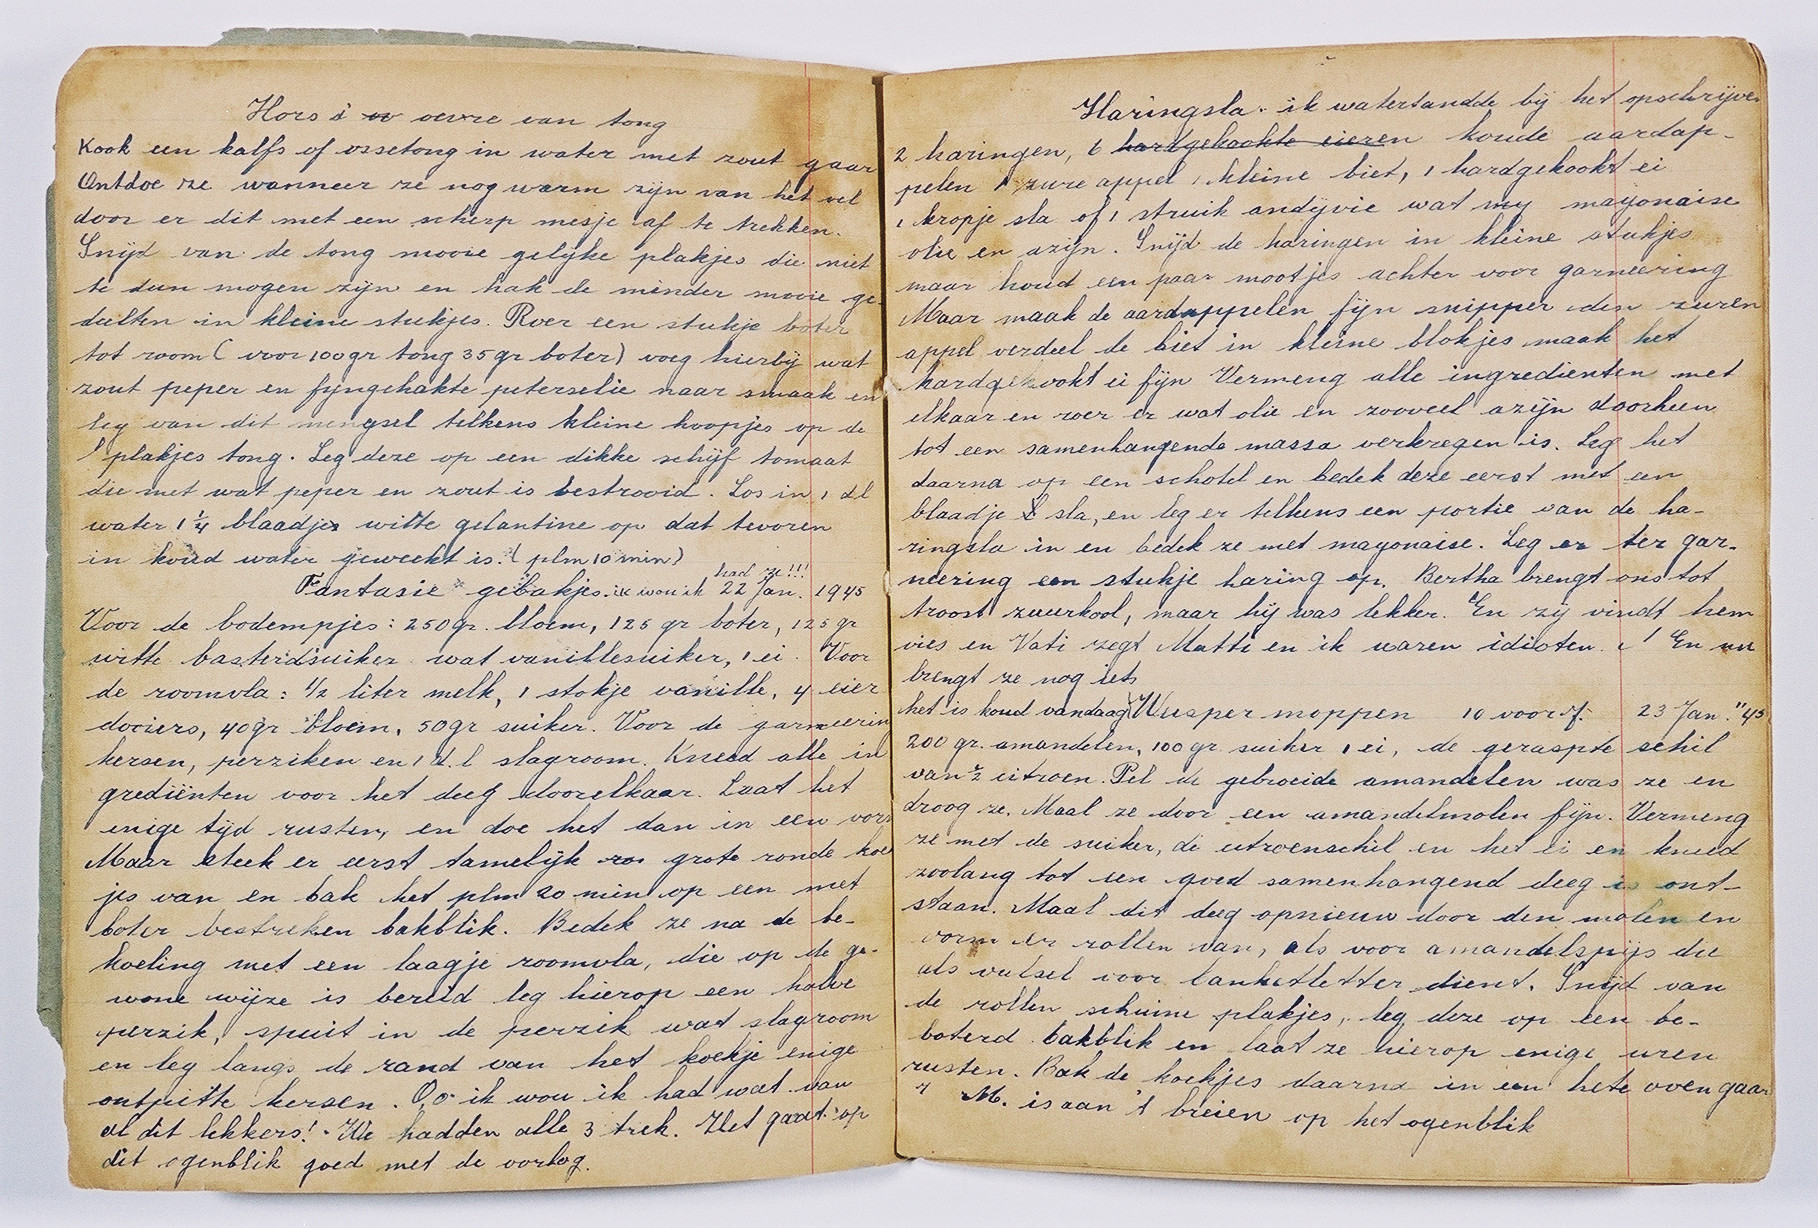 Pages from a diary written by Susie Grunbaum Schwarz while in hiding.  She disguised the diary in the form of a cookbook written in several languages.